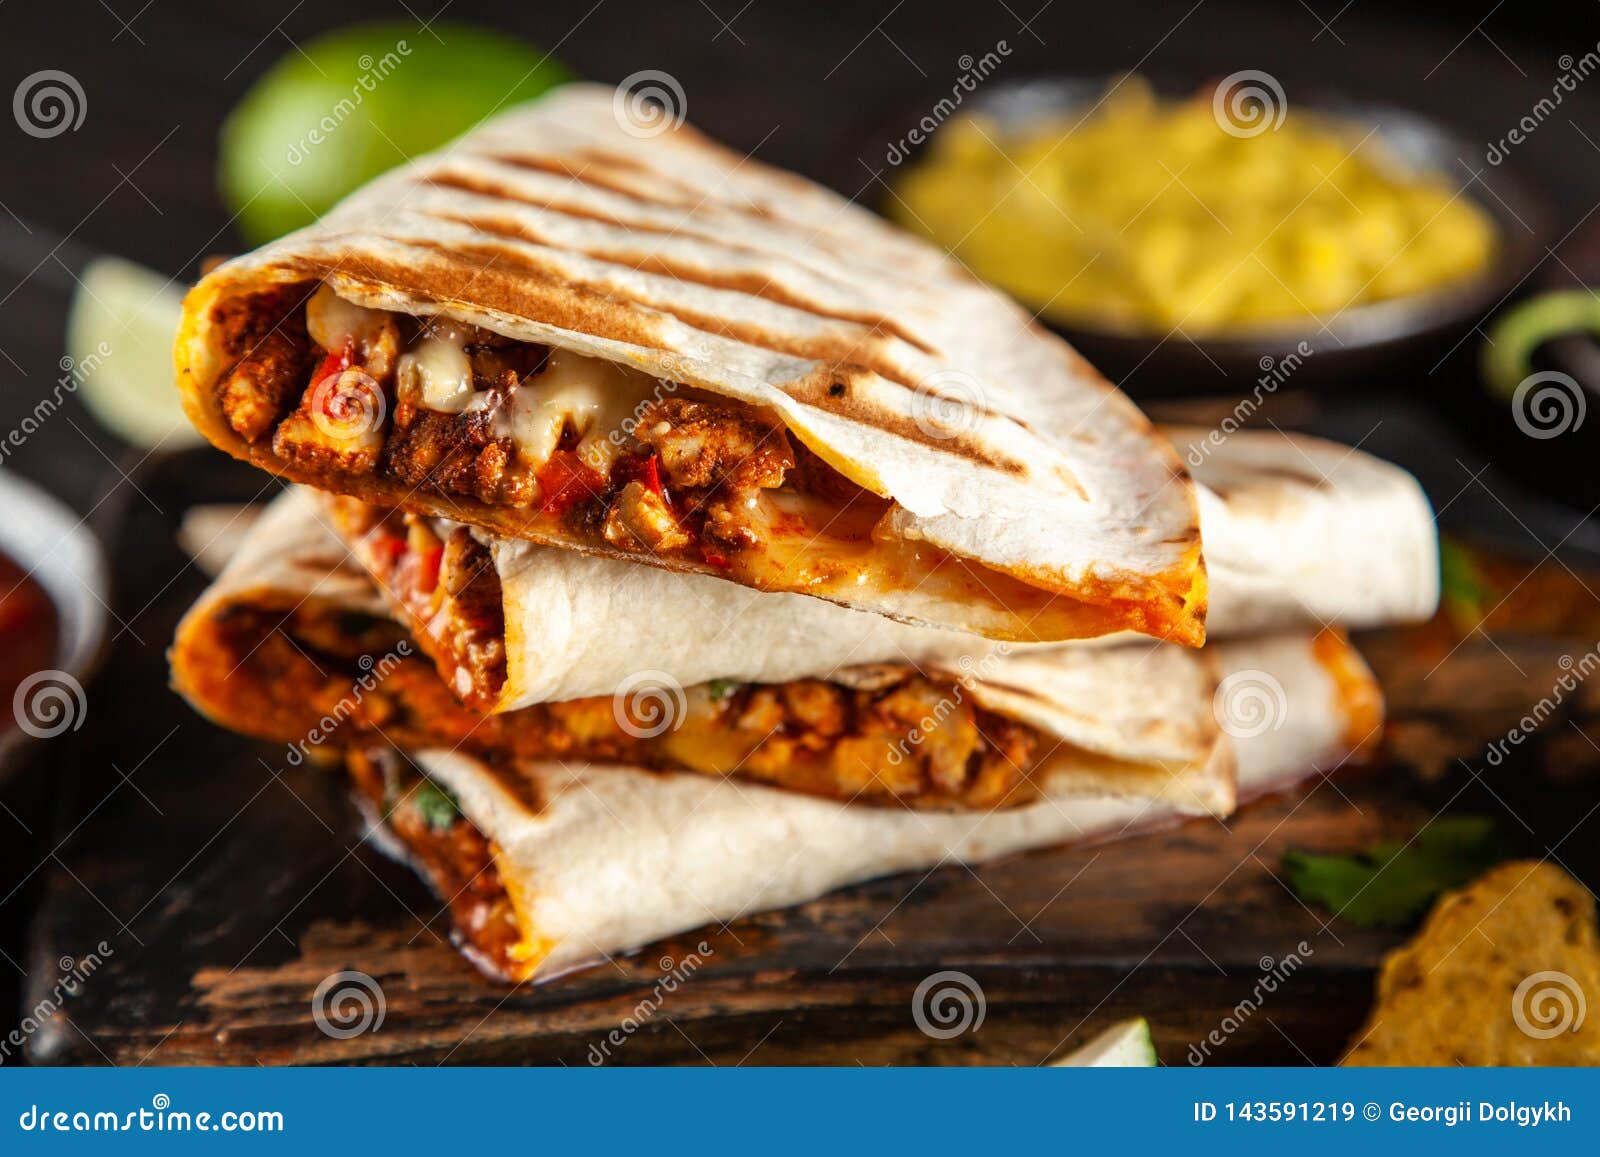 Chicken Quesadillas with Paprika and Cheese Stock Image - Image of ...